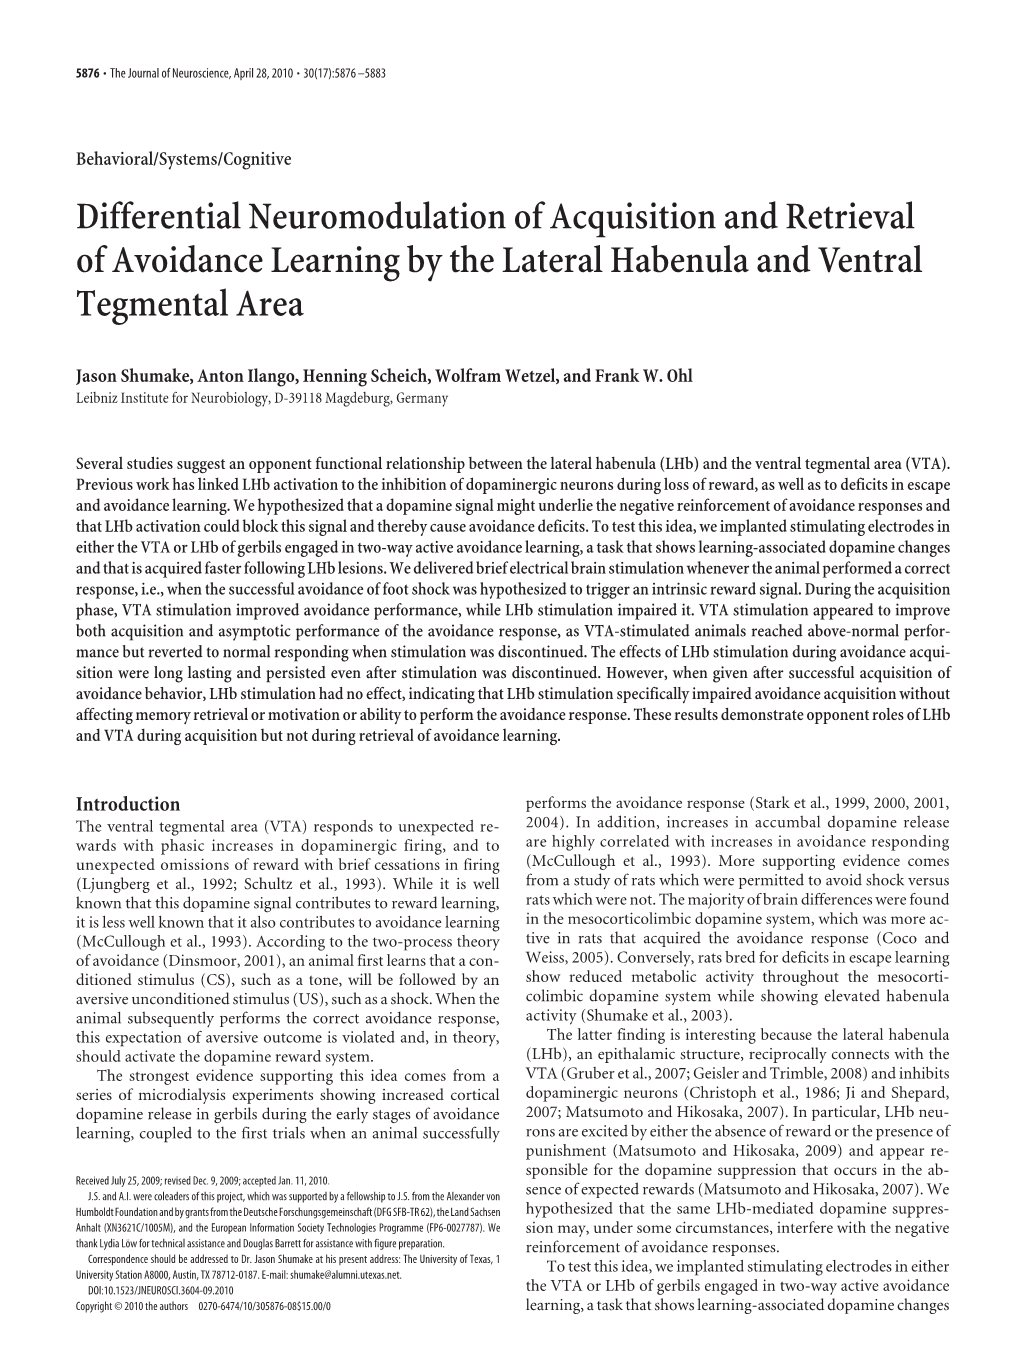 Differential Neuromodulation of Acquisition and Retrieval of Avoidance Learning by the Lateral Habenula and Ventral Tegmental Area